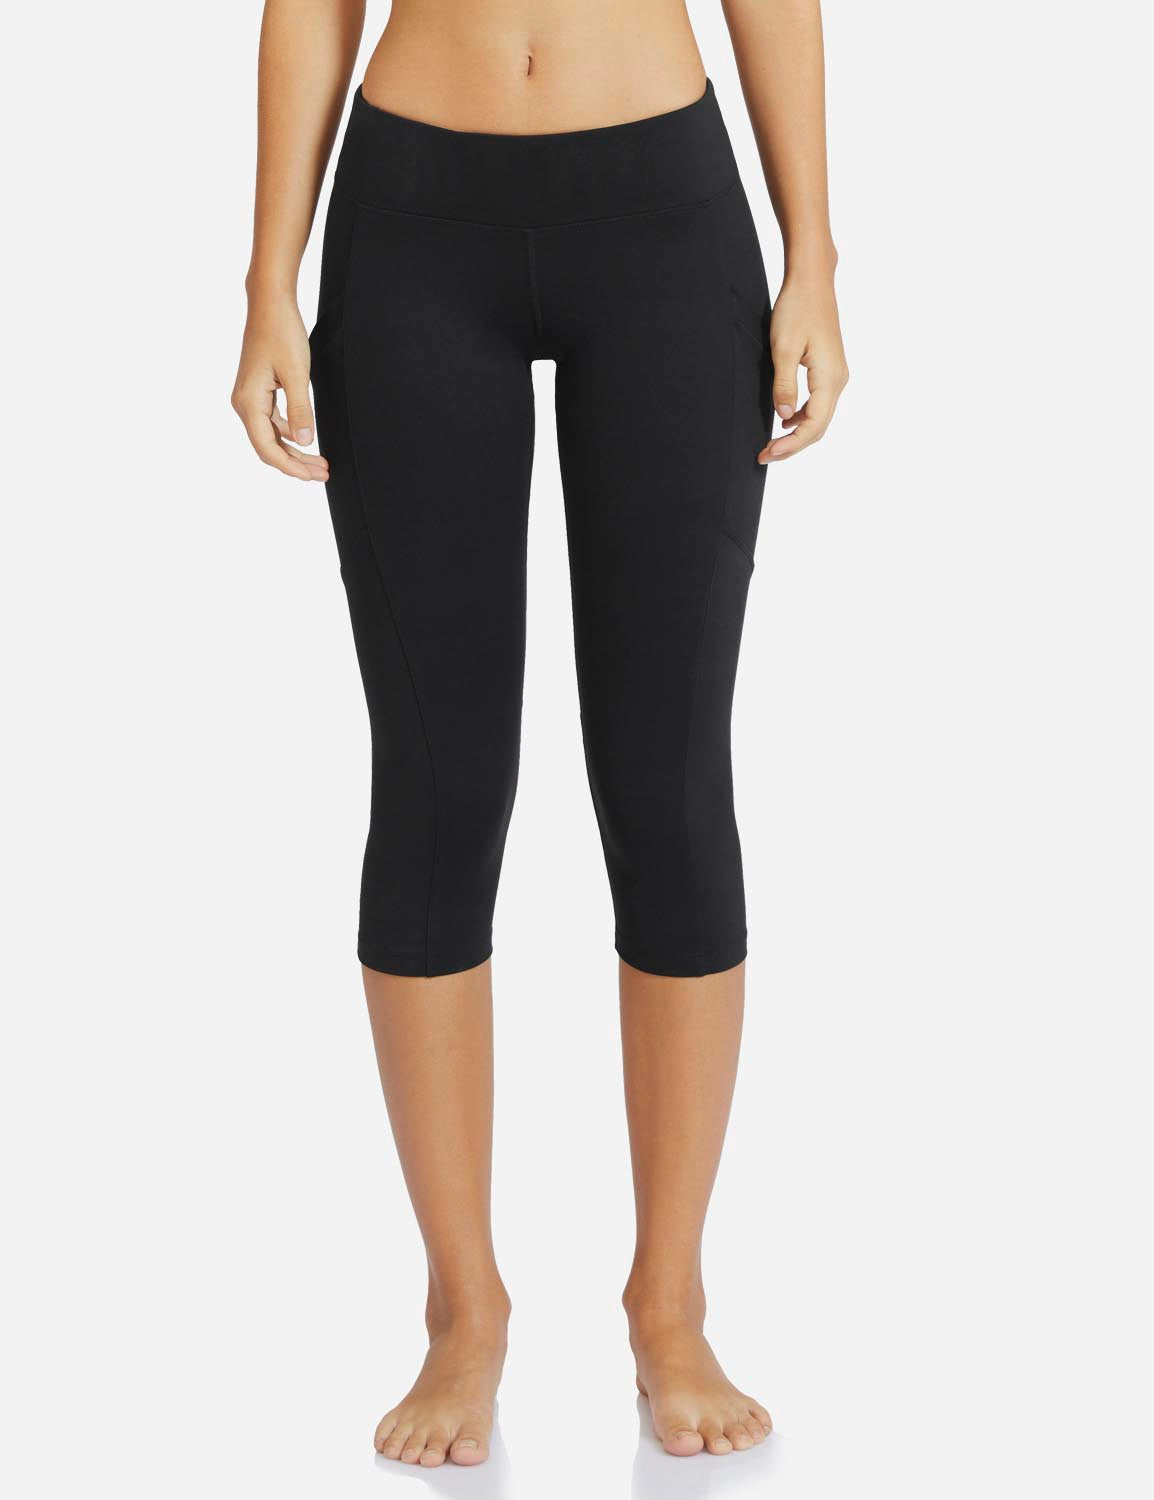 Baleaf Women's Basic Low Rise Quick-Dry Side & Hidden Pocketed Capris abh005 Black Front